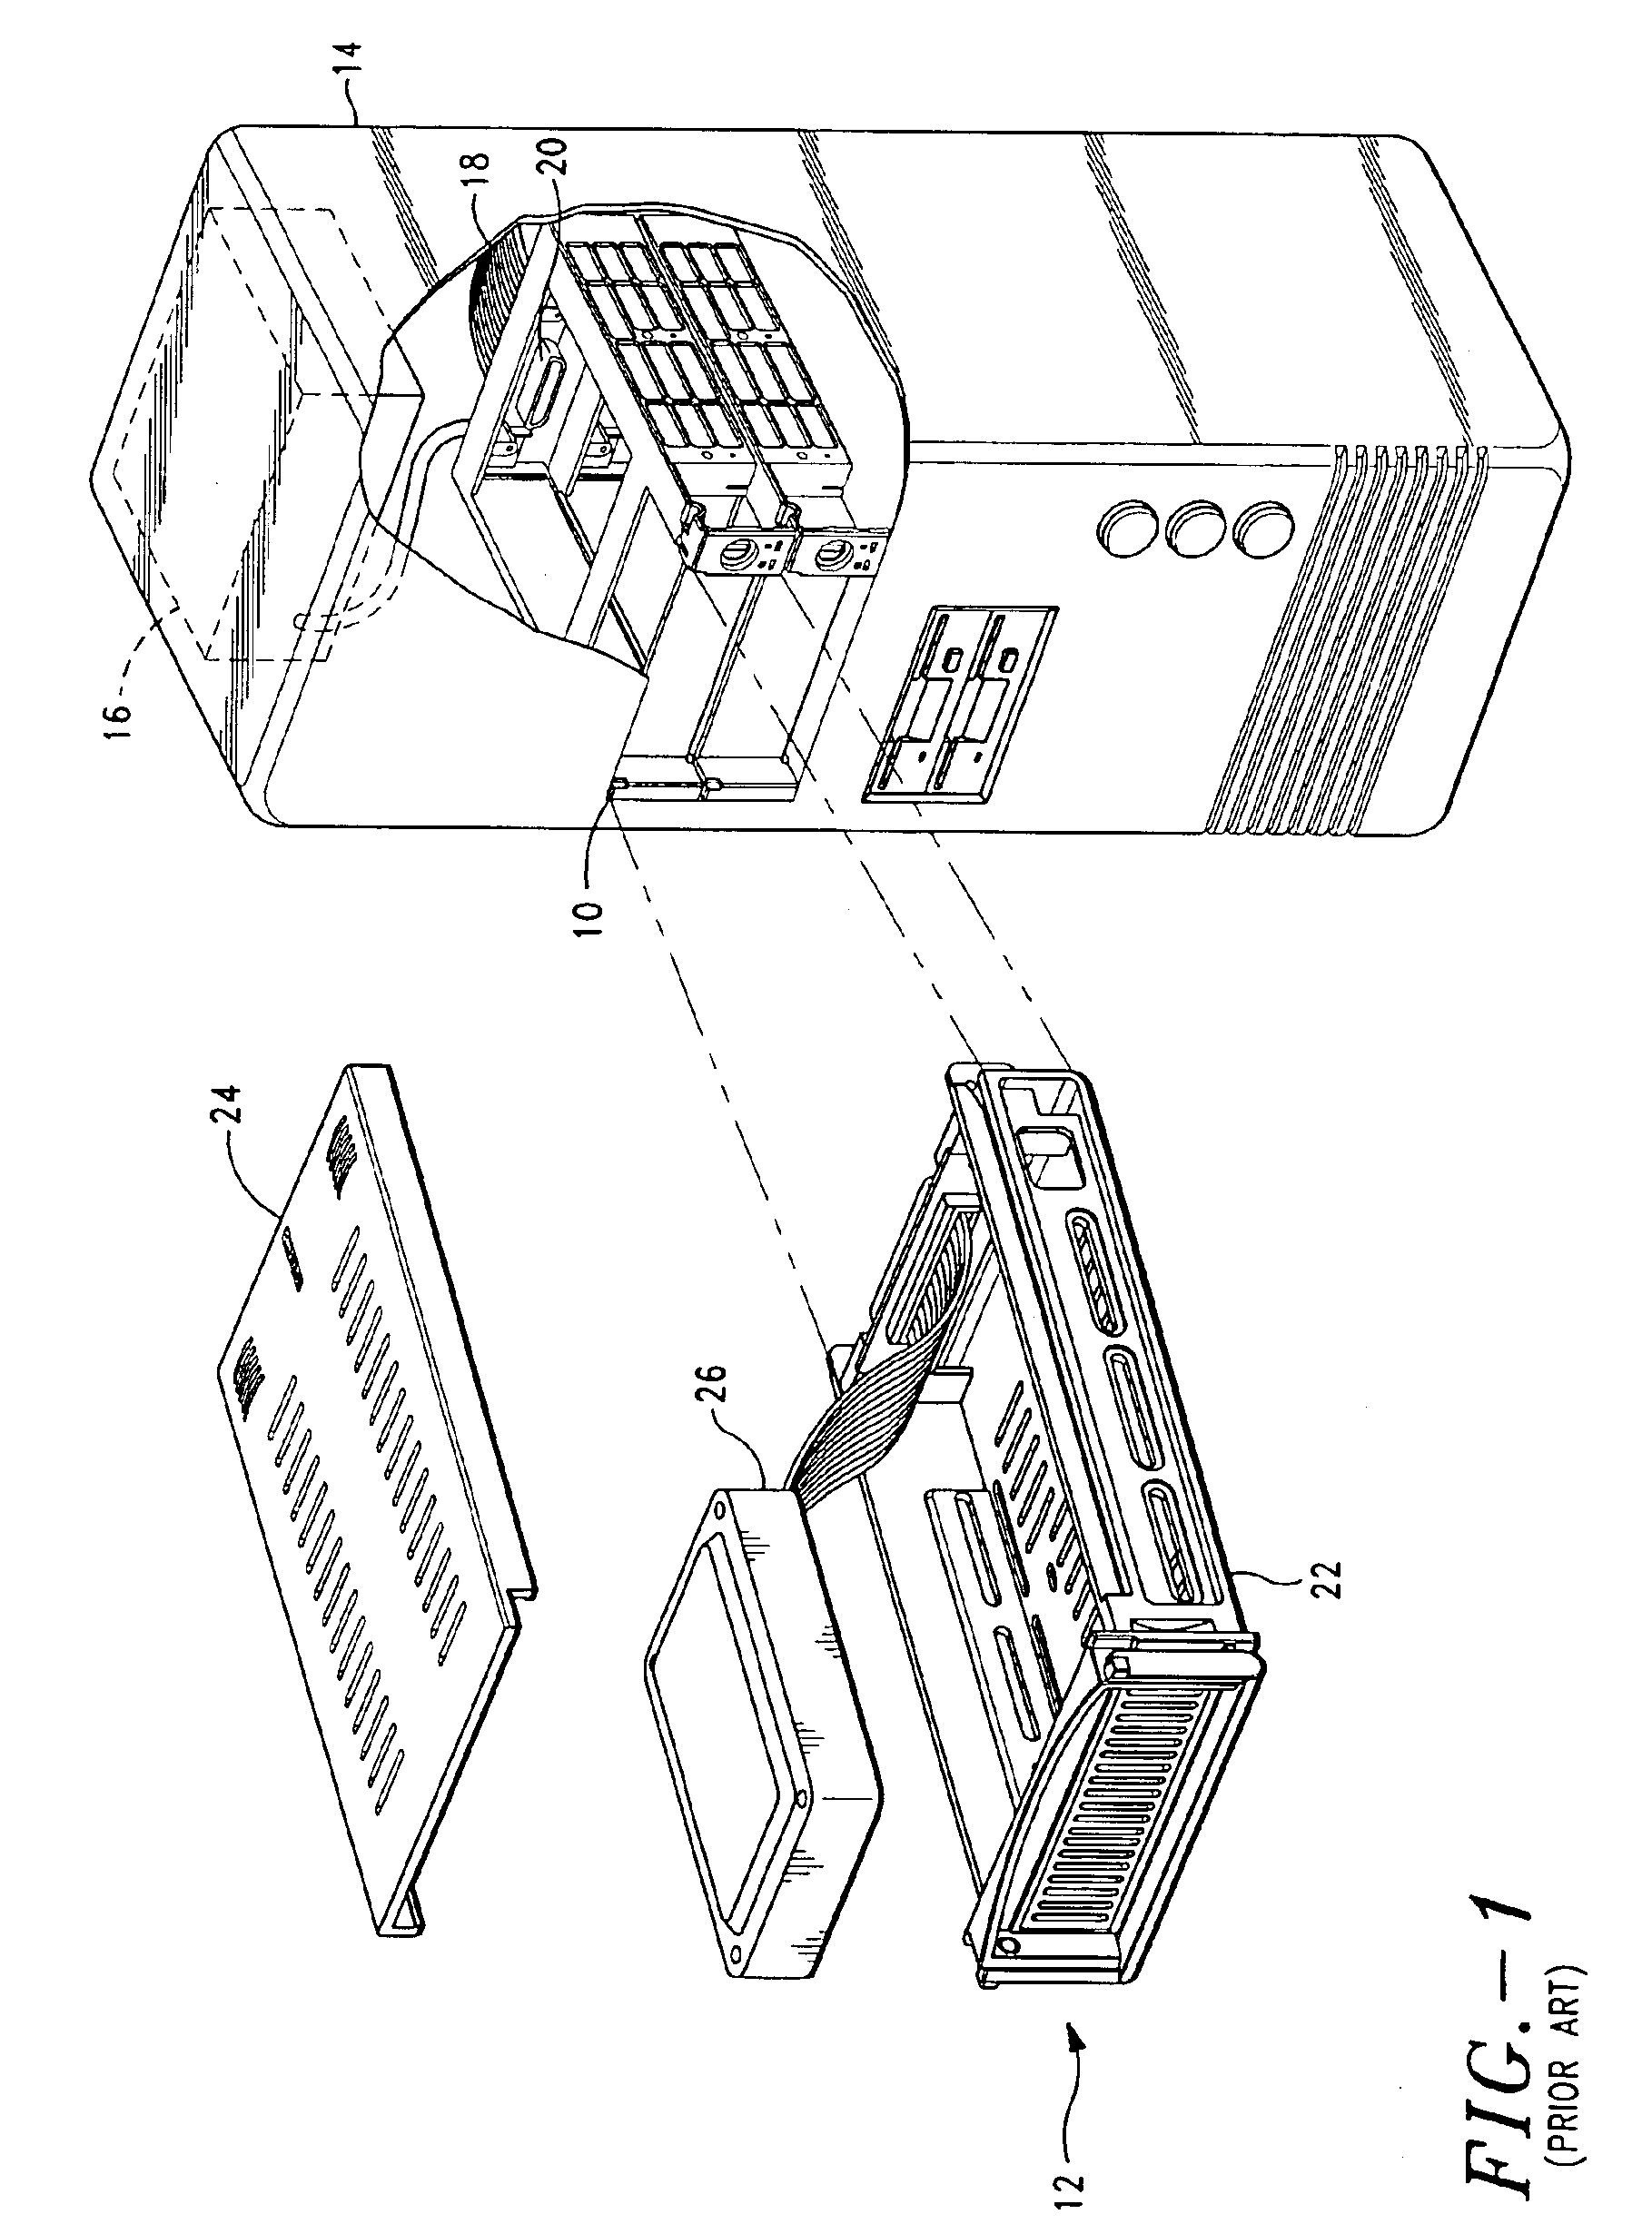 Docking apparatus for PC card devices